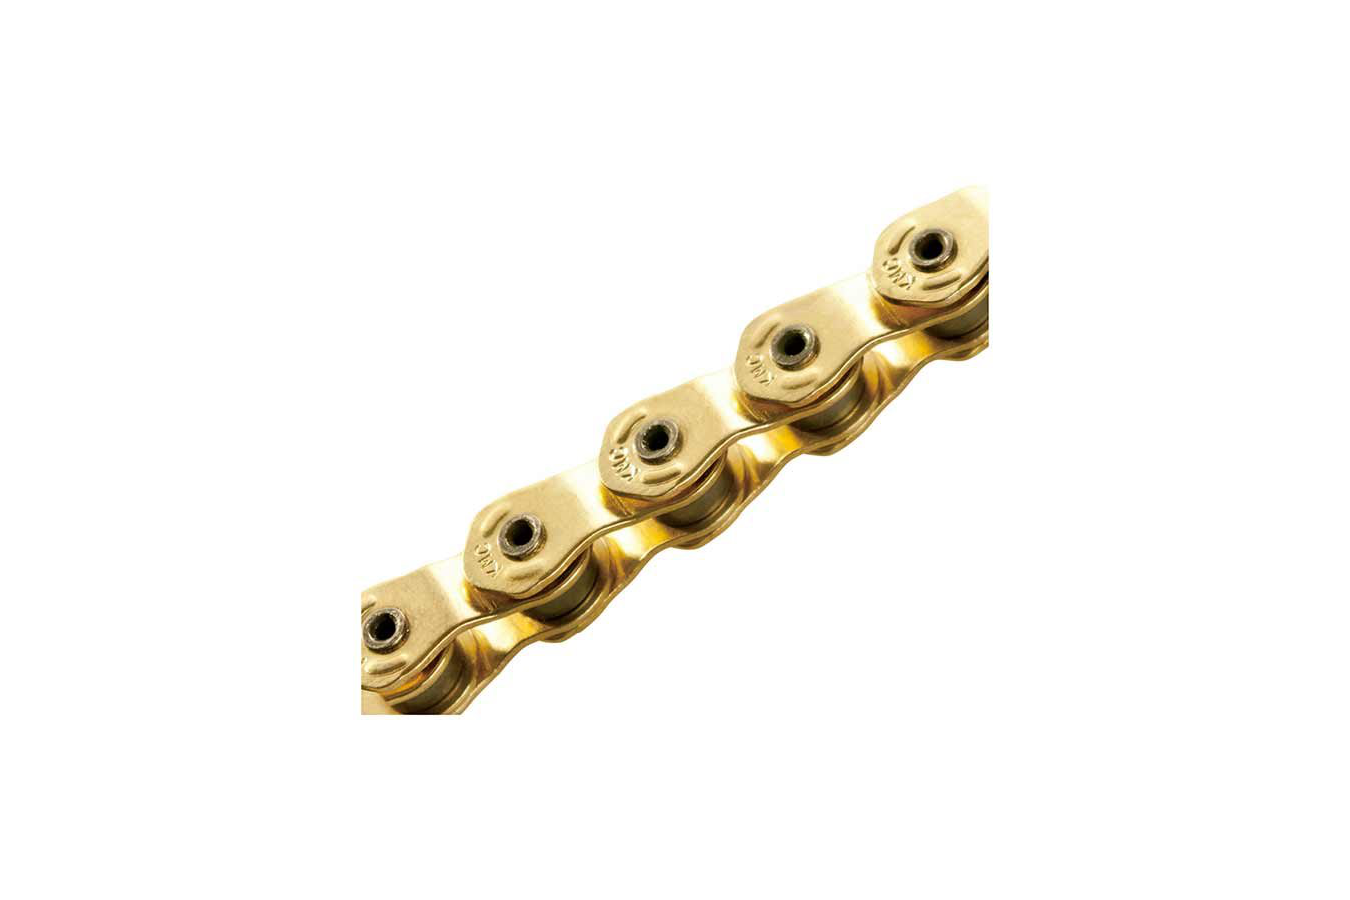 KMC HL1L Single Speed Chain 9.4mm 100 Link Gold